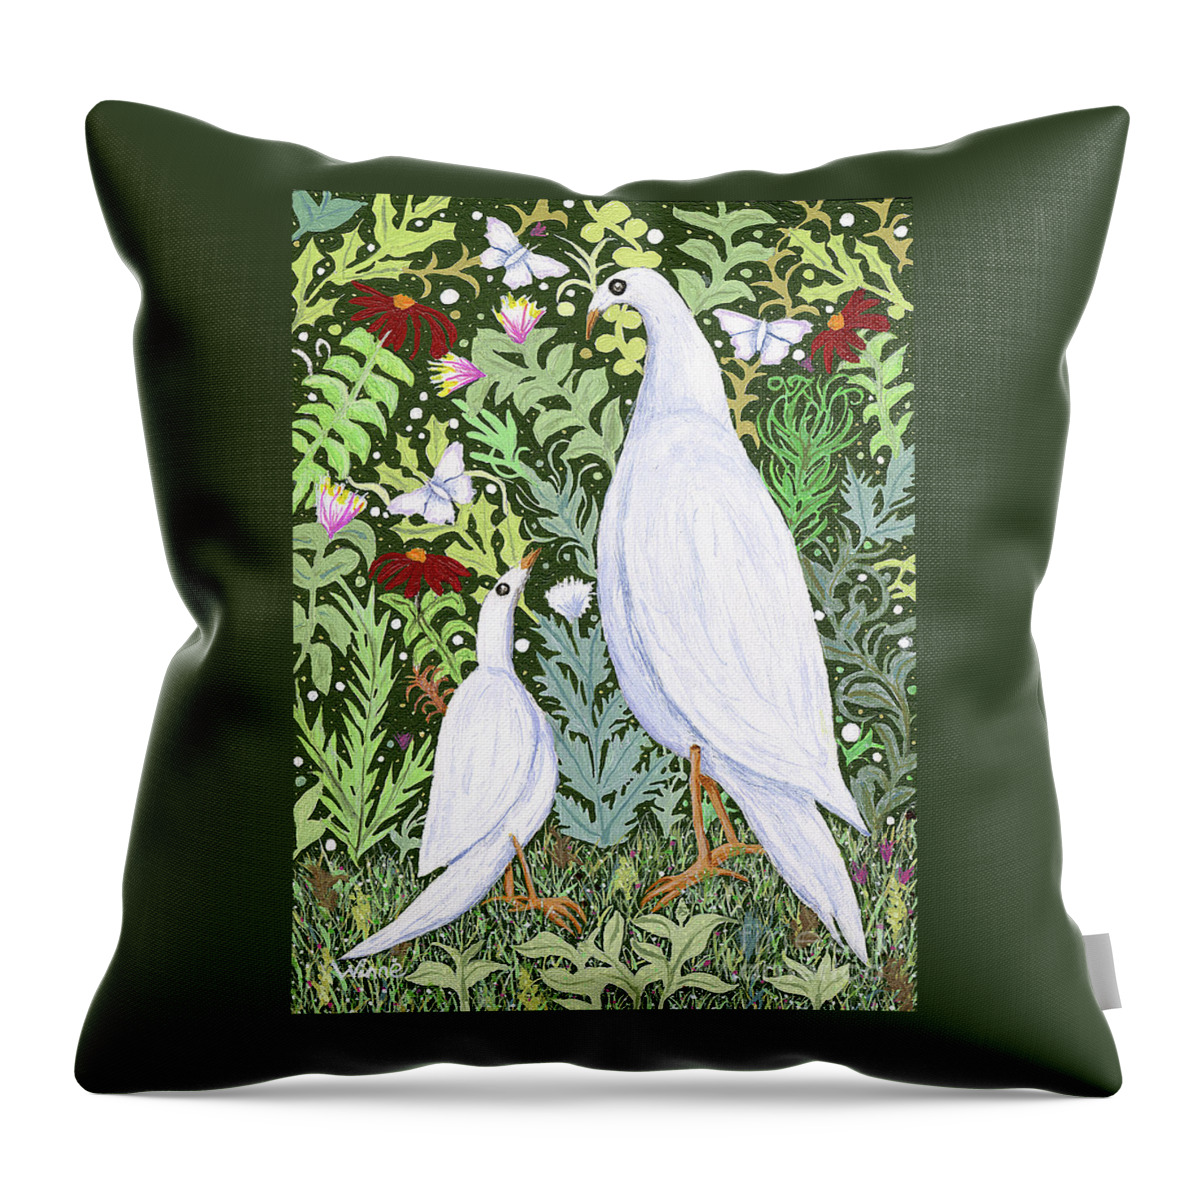 Lise Winne Throw Pillow featuring the painting Sapientes Pacis Birds by Lise Winne